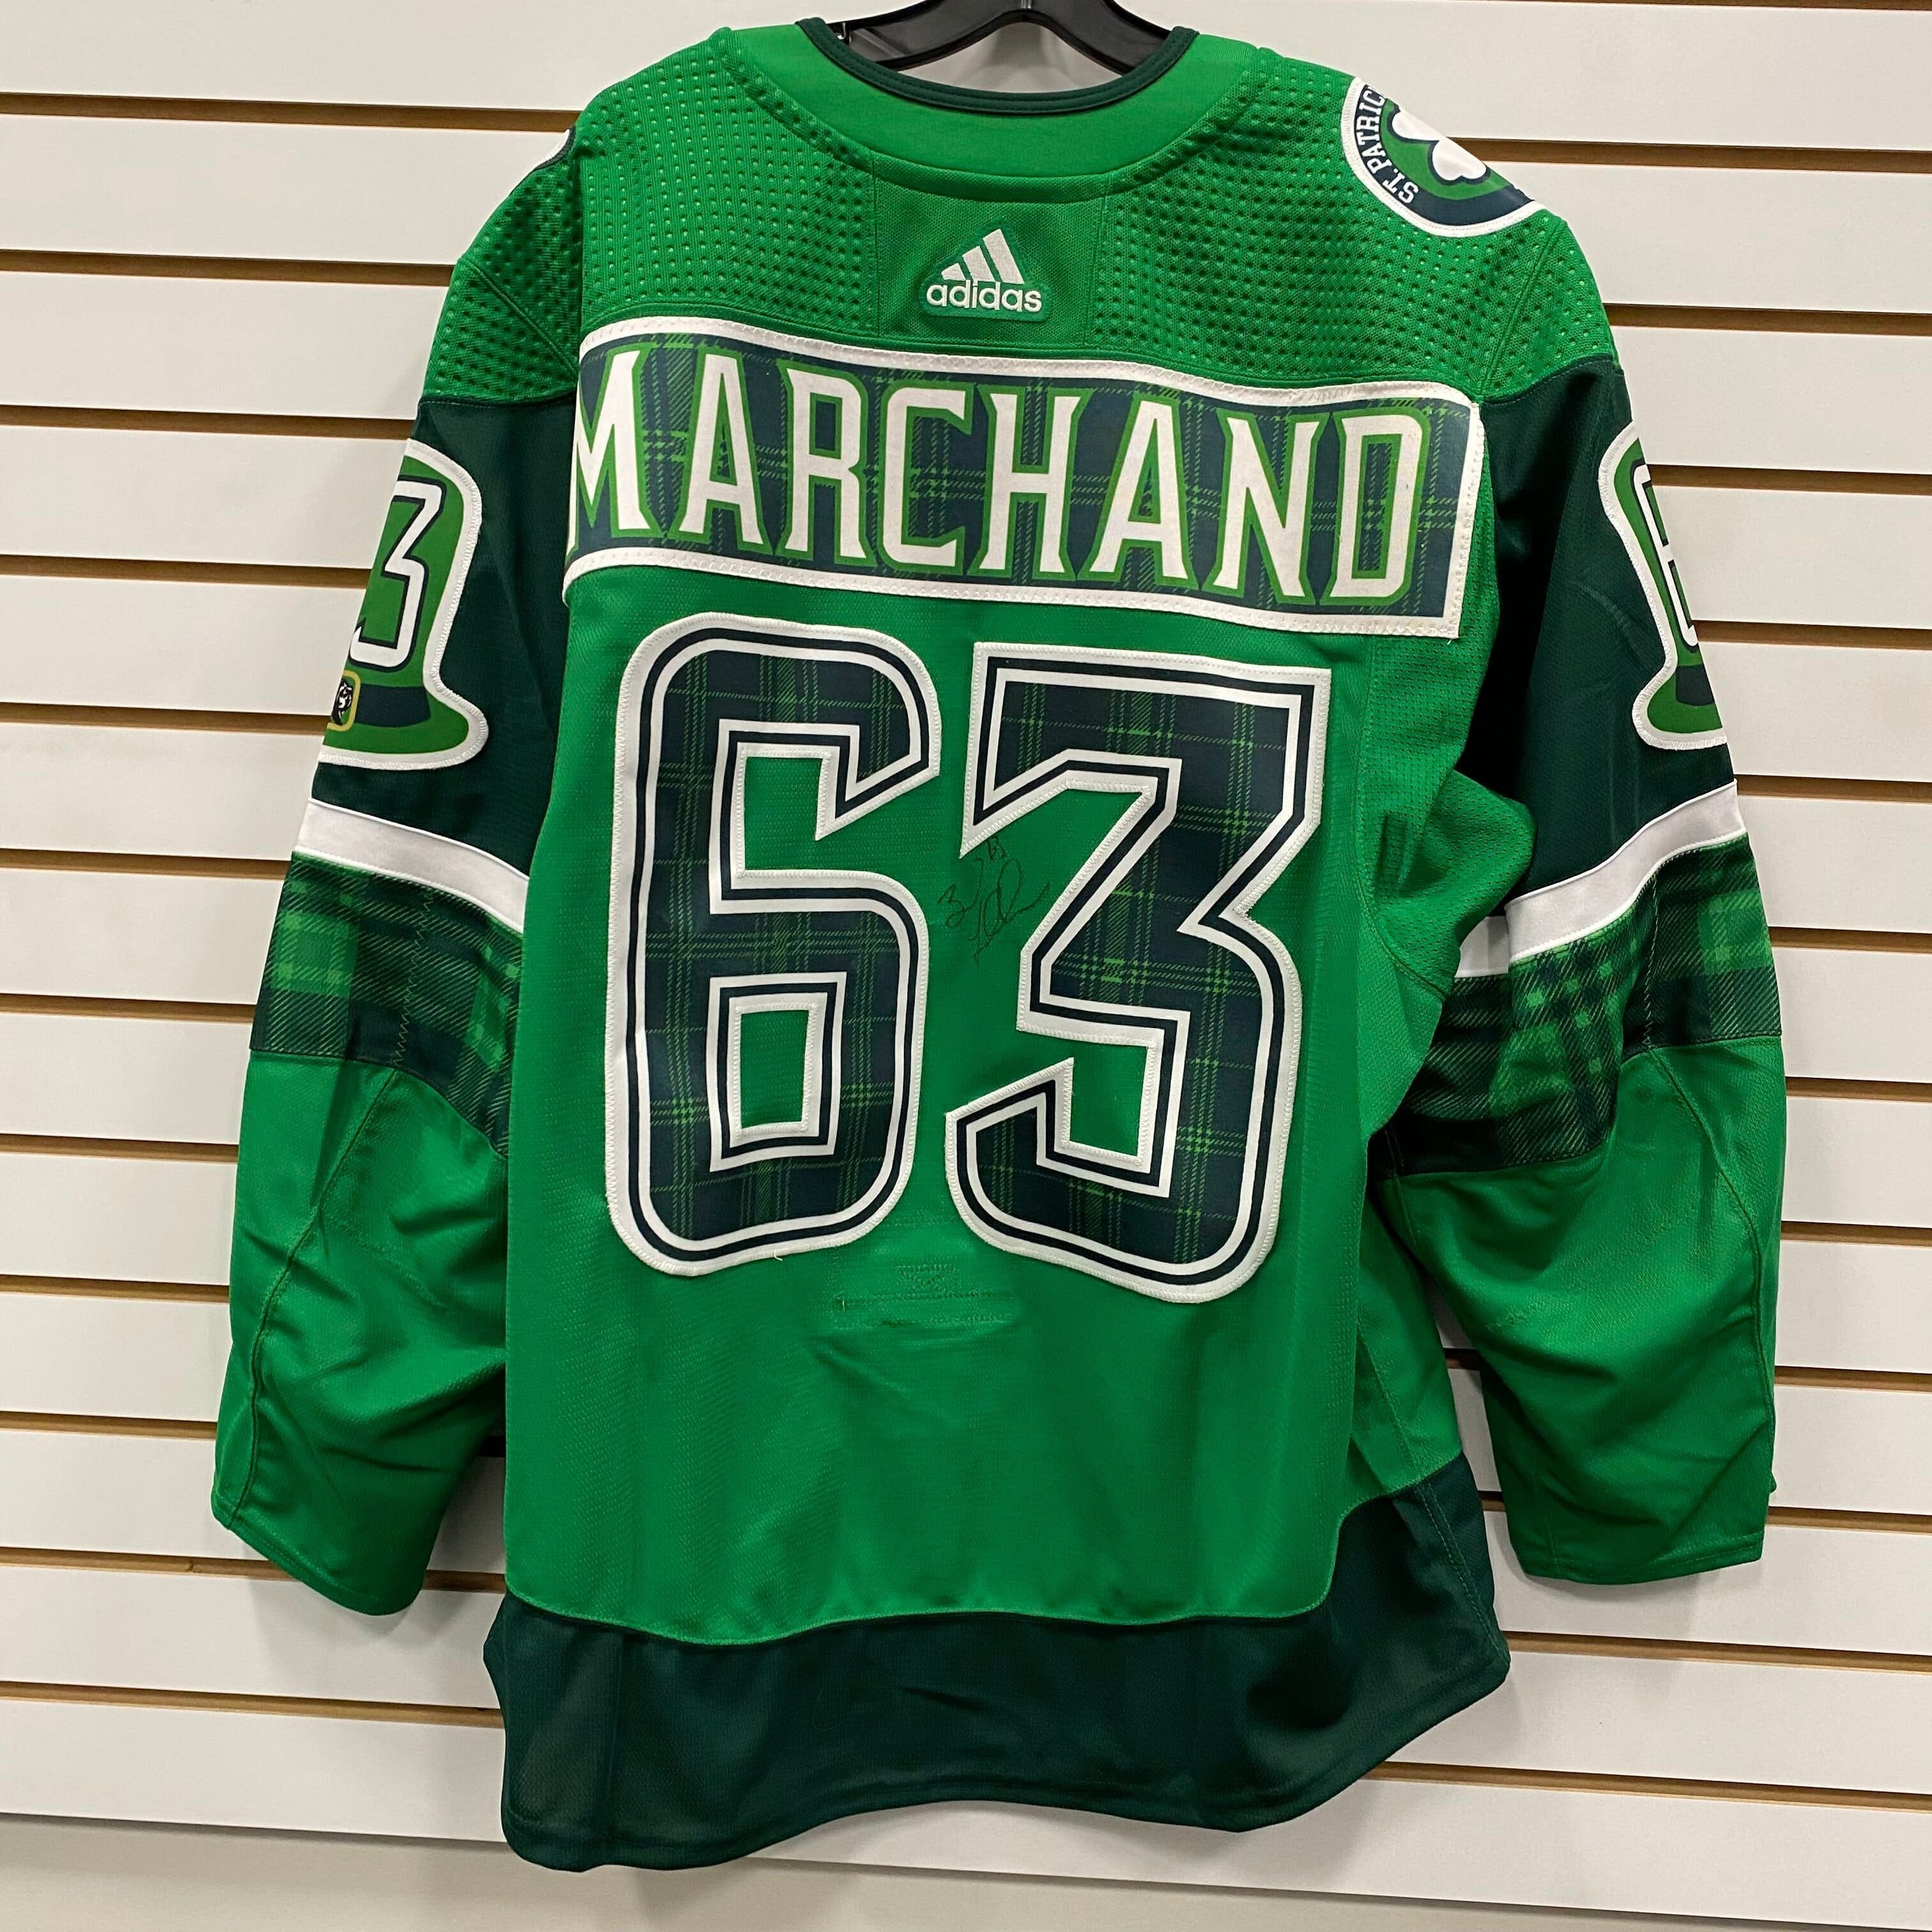 Autographed Brad Marchand Jersey - Franchise Number 20x24 Frame